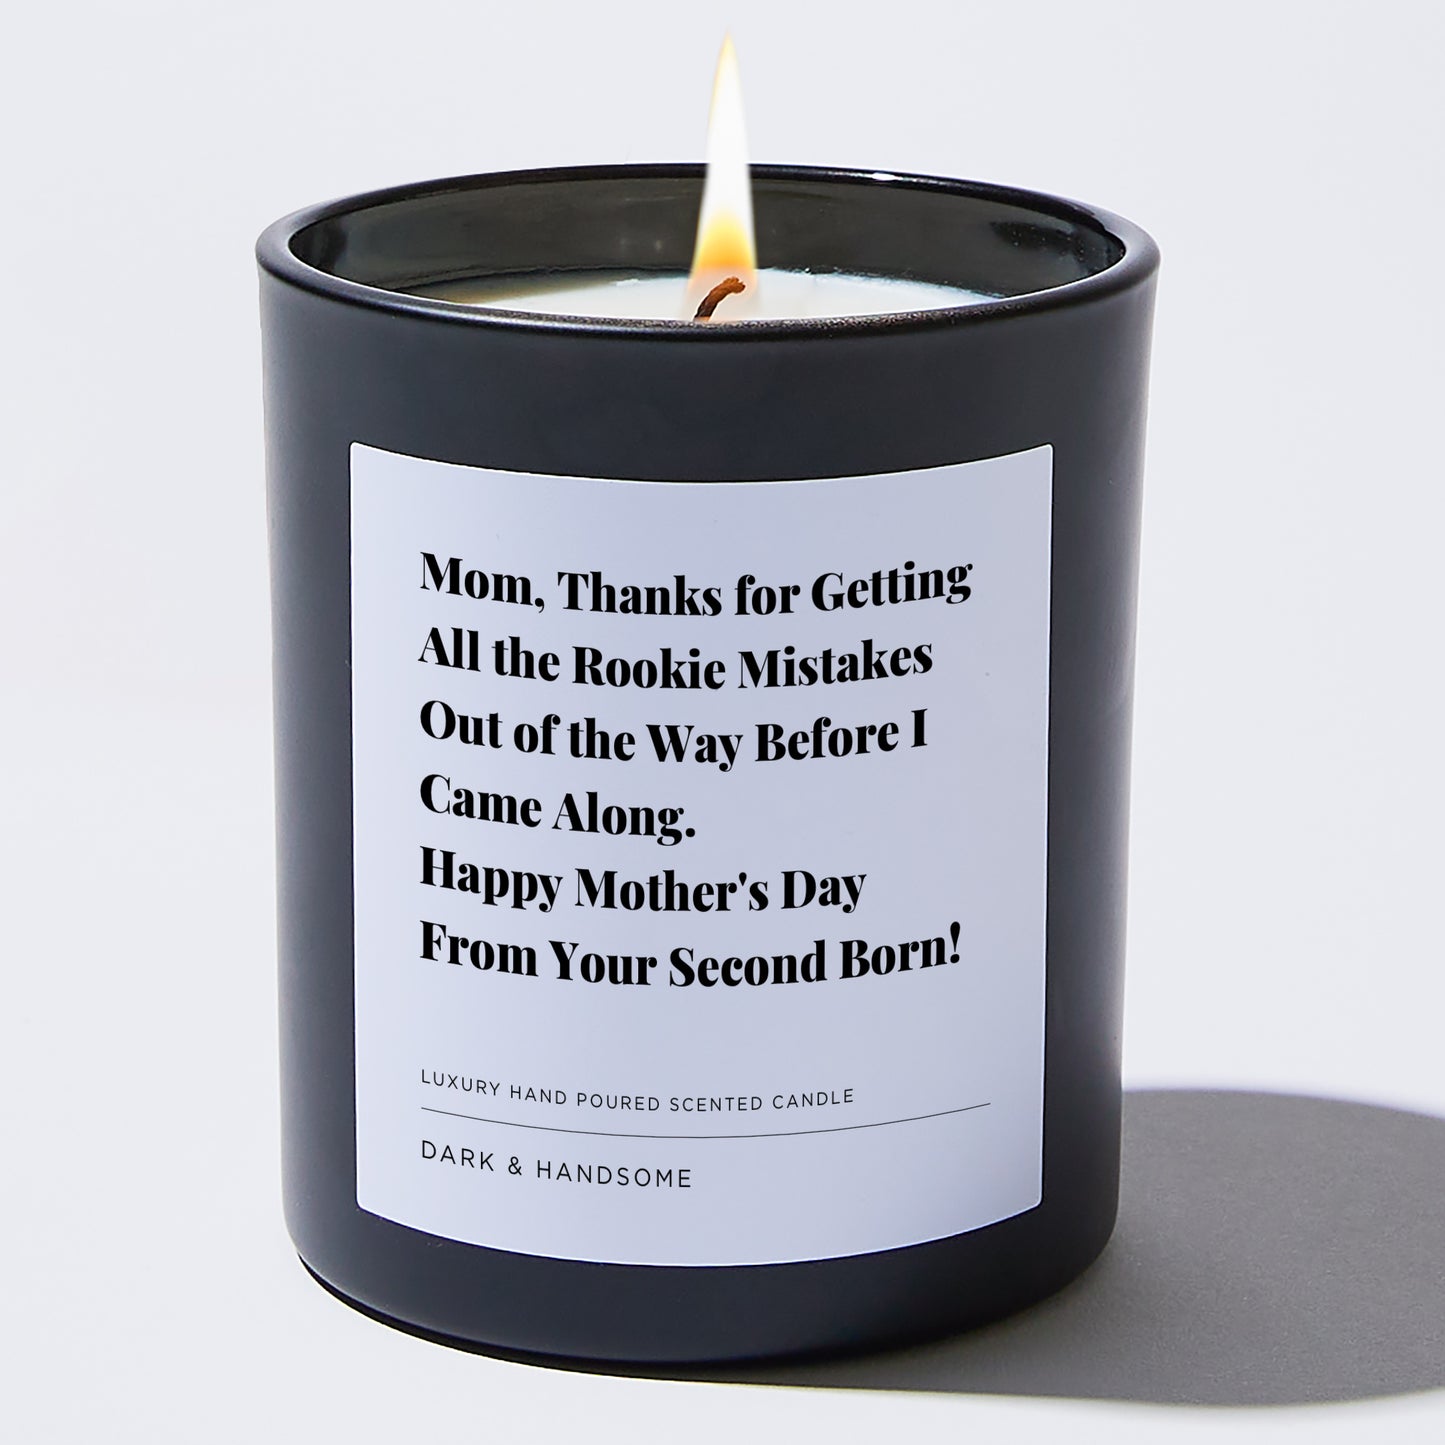 Gift for Mom - Mom, thanks for getting all the rookie mistakes out of the way before I came along. Happy Mother's Day from your second born! - Candle